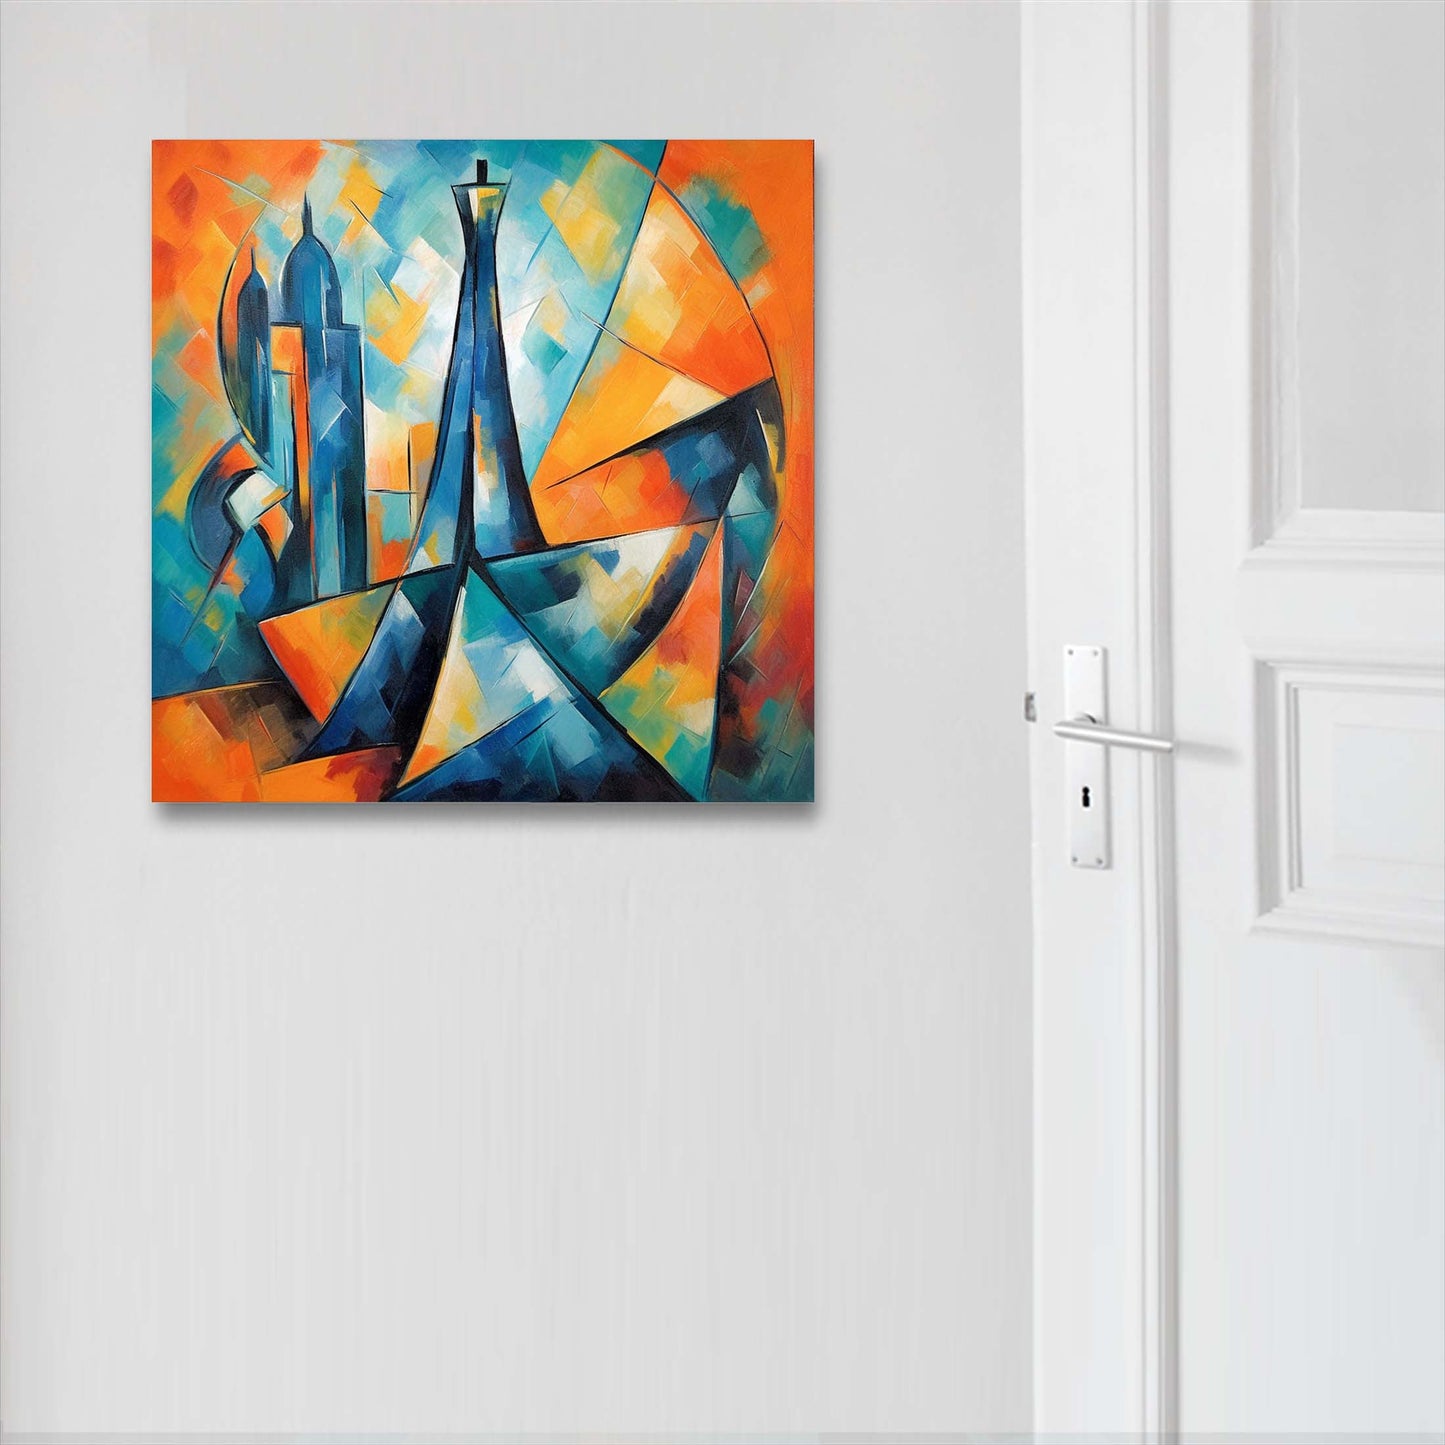 Paris Eiffel Tower - mural in the style of expressionism